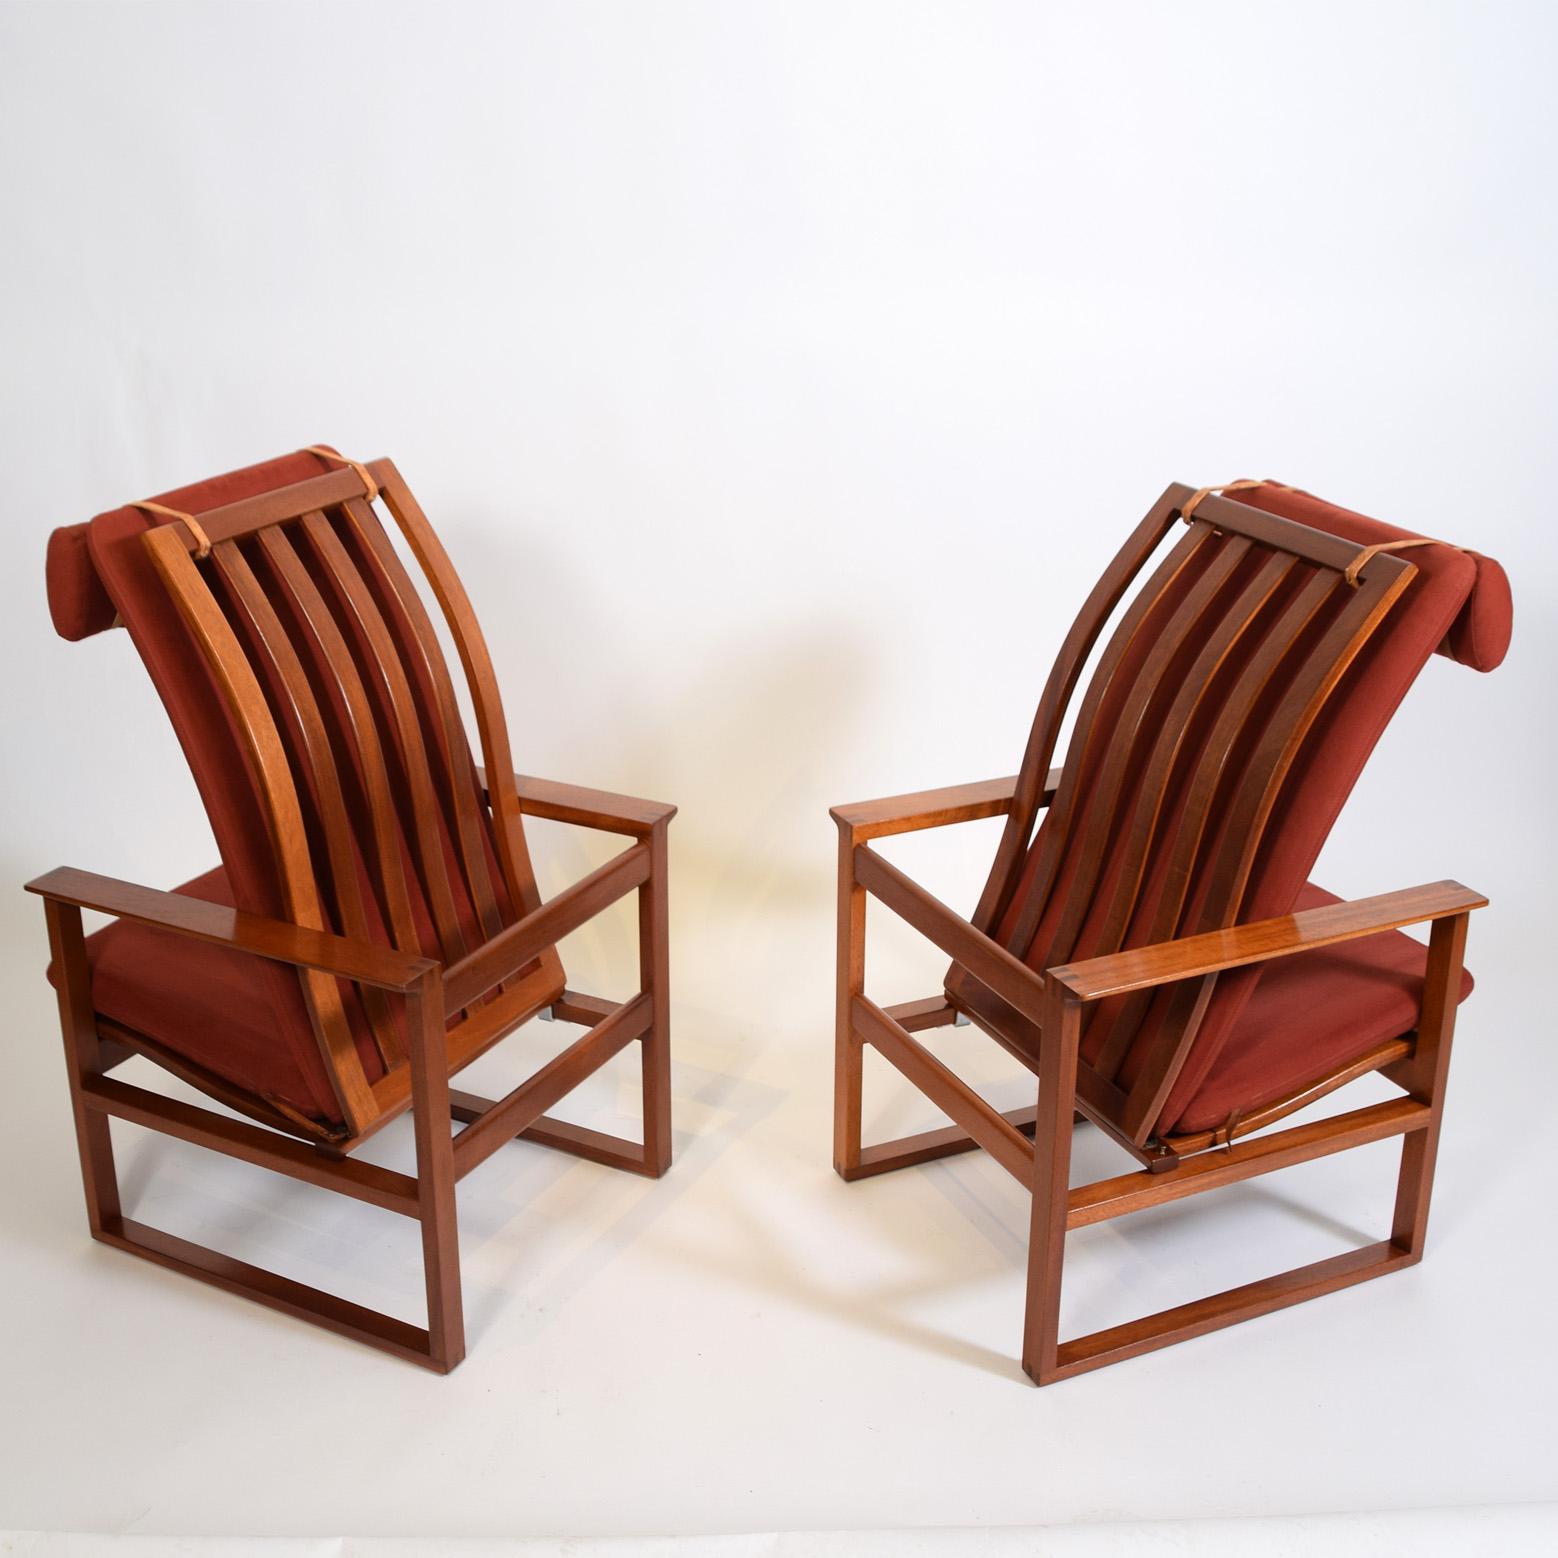 Mid-20th Century Børge Mogensen, Model 2254 Lounge Chairs, 1956 For Sale